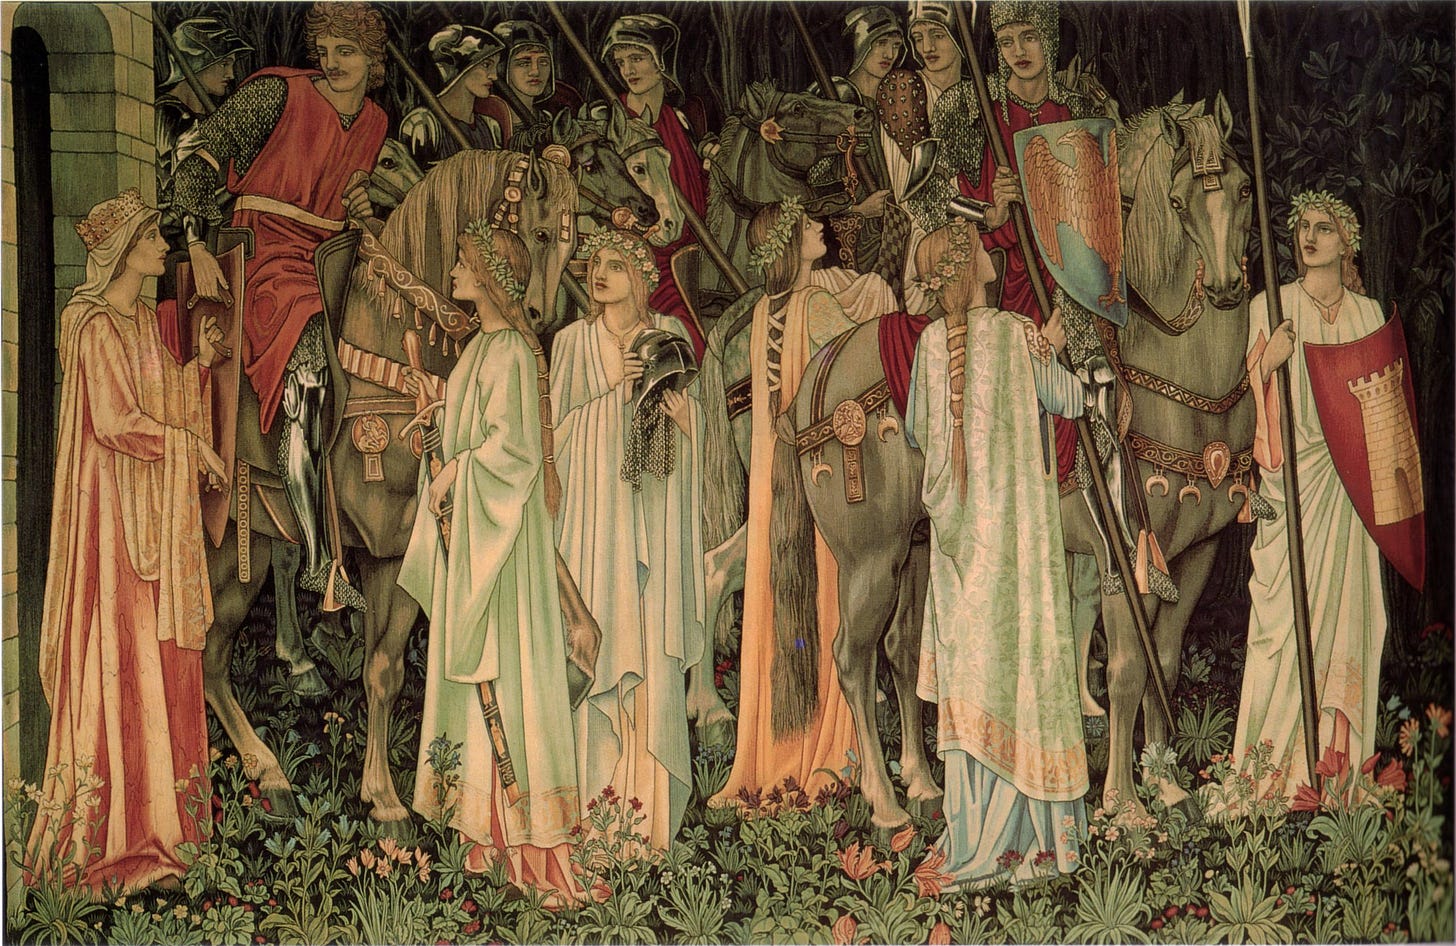 The Arming and Departure of the Knights, one of the Holy Grail tapestries, 1890s, figures by Burne-Jones.